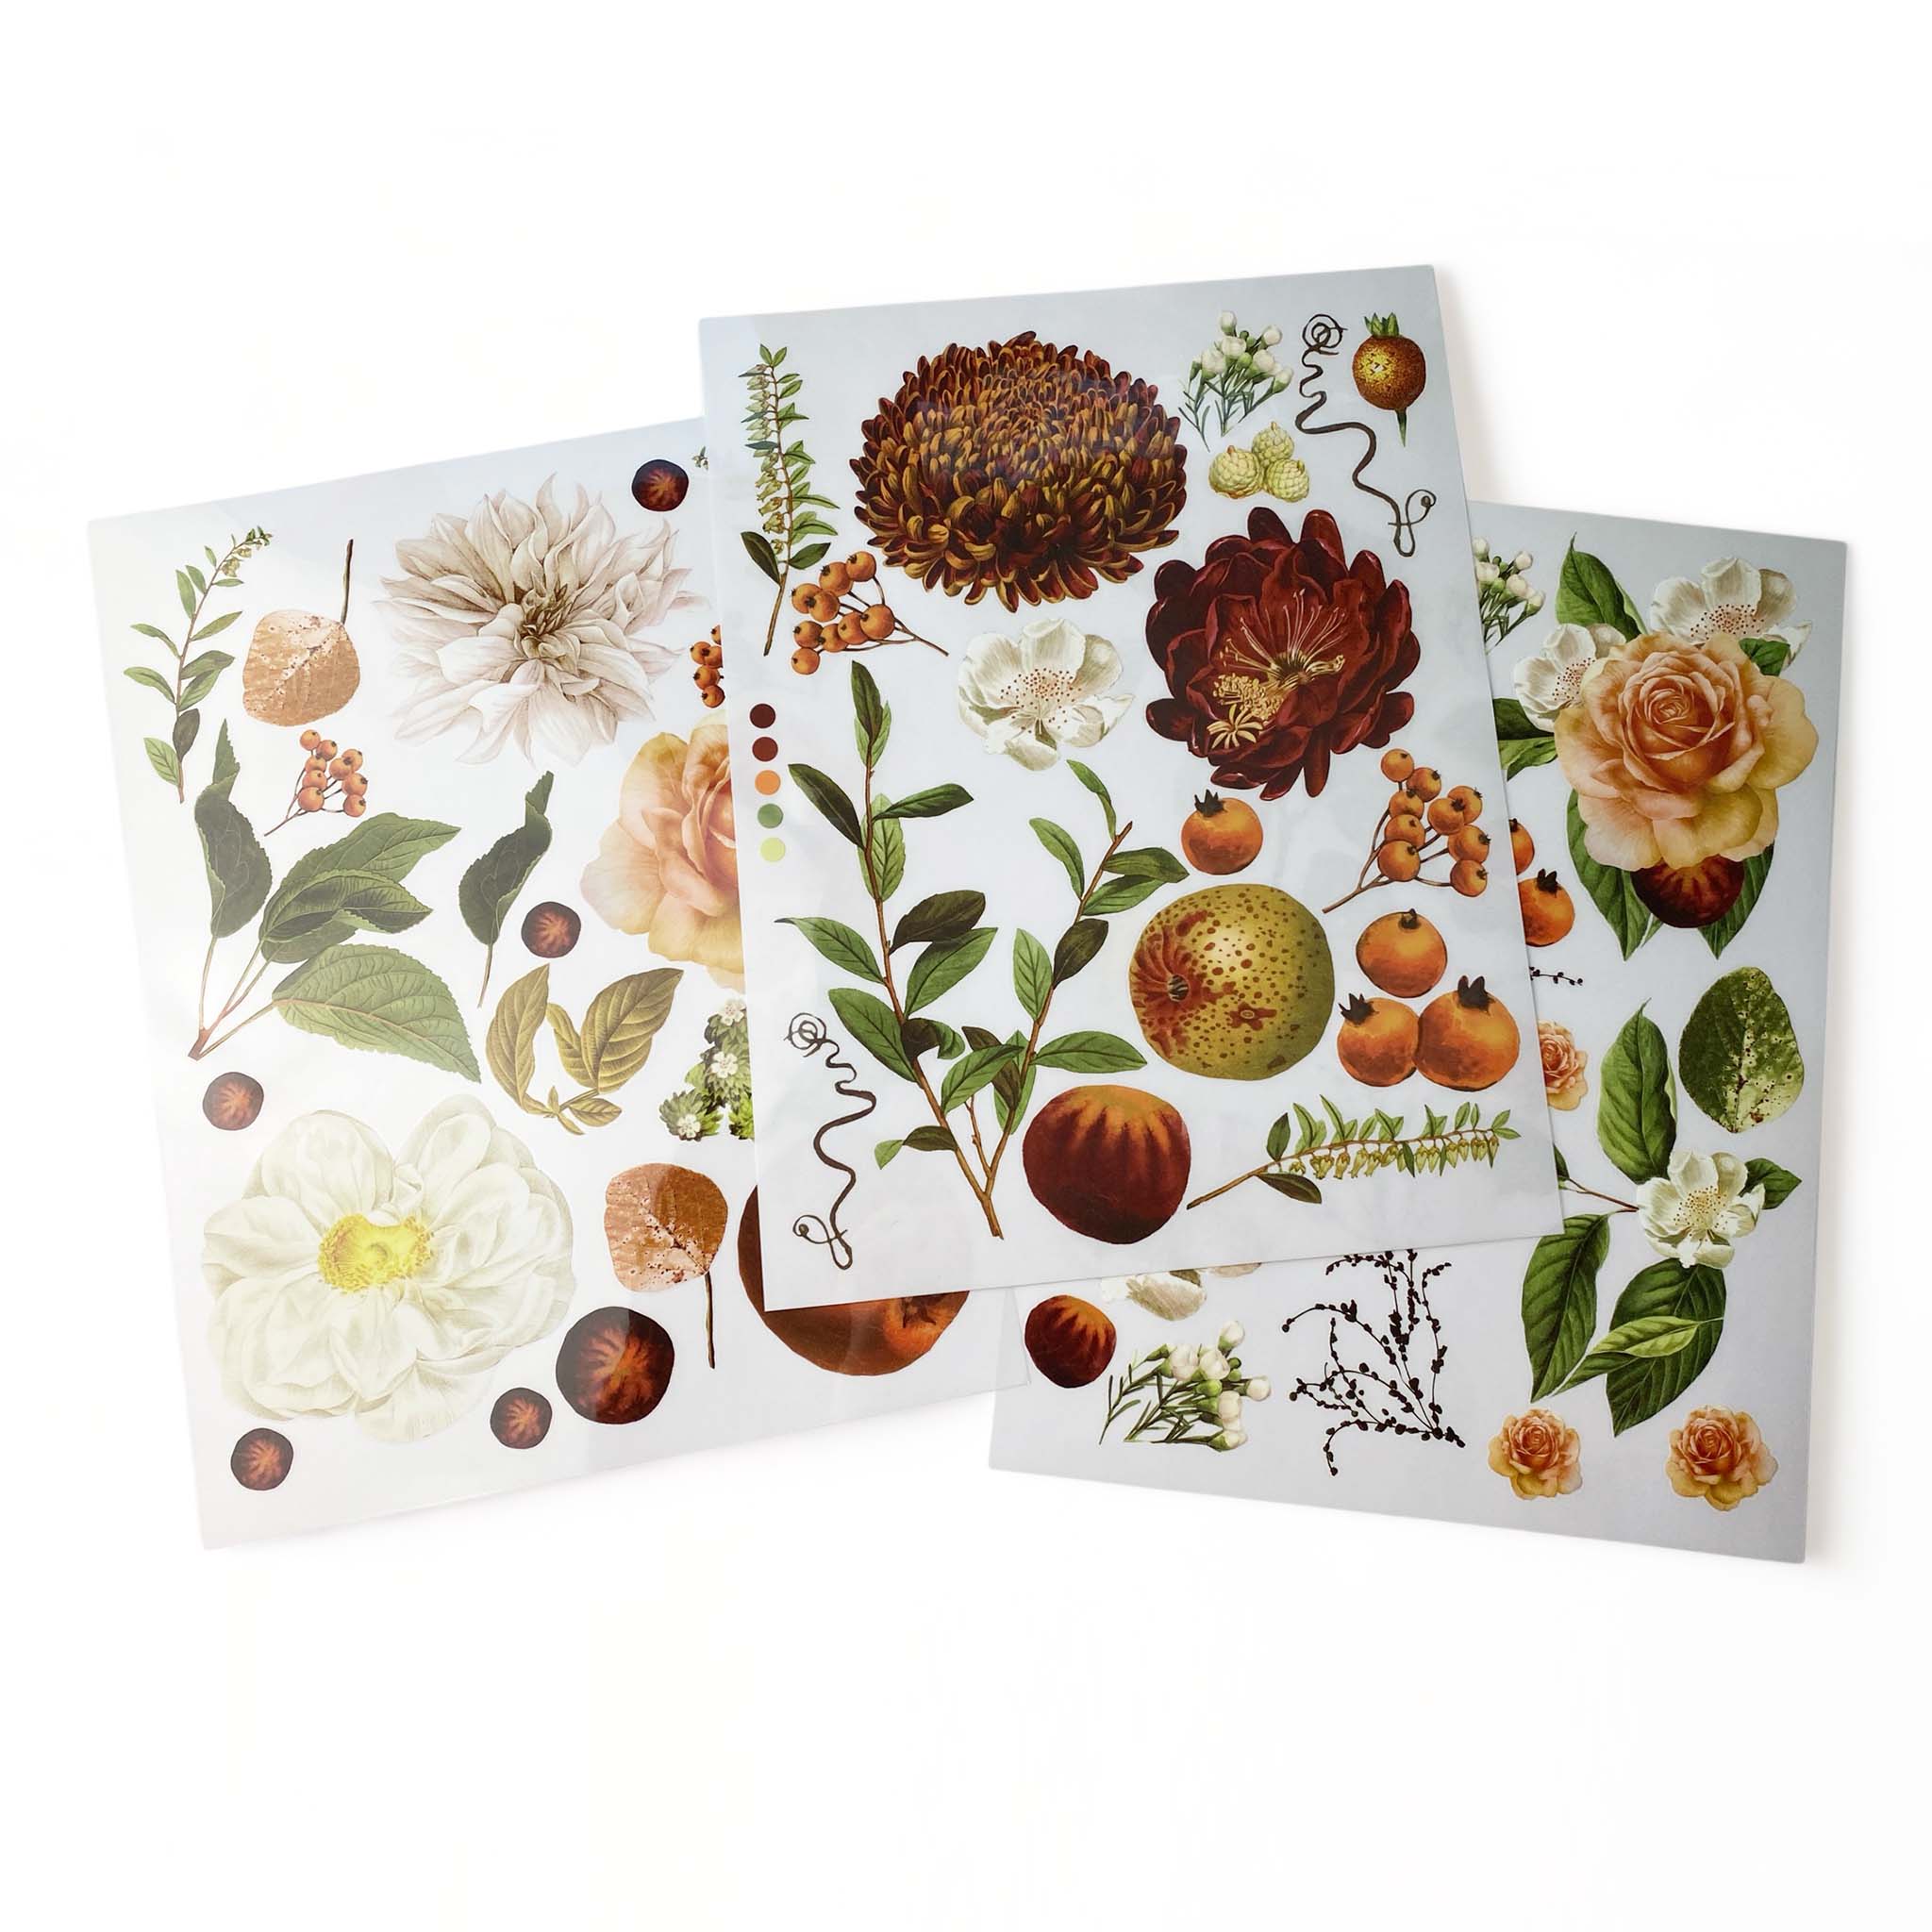 Three sheets of 8.5" x 11" small rub-on transfers that feature autumn flowers, foliage, and fruits are against a white background.